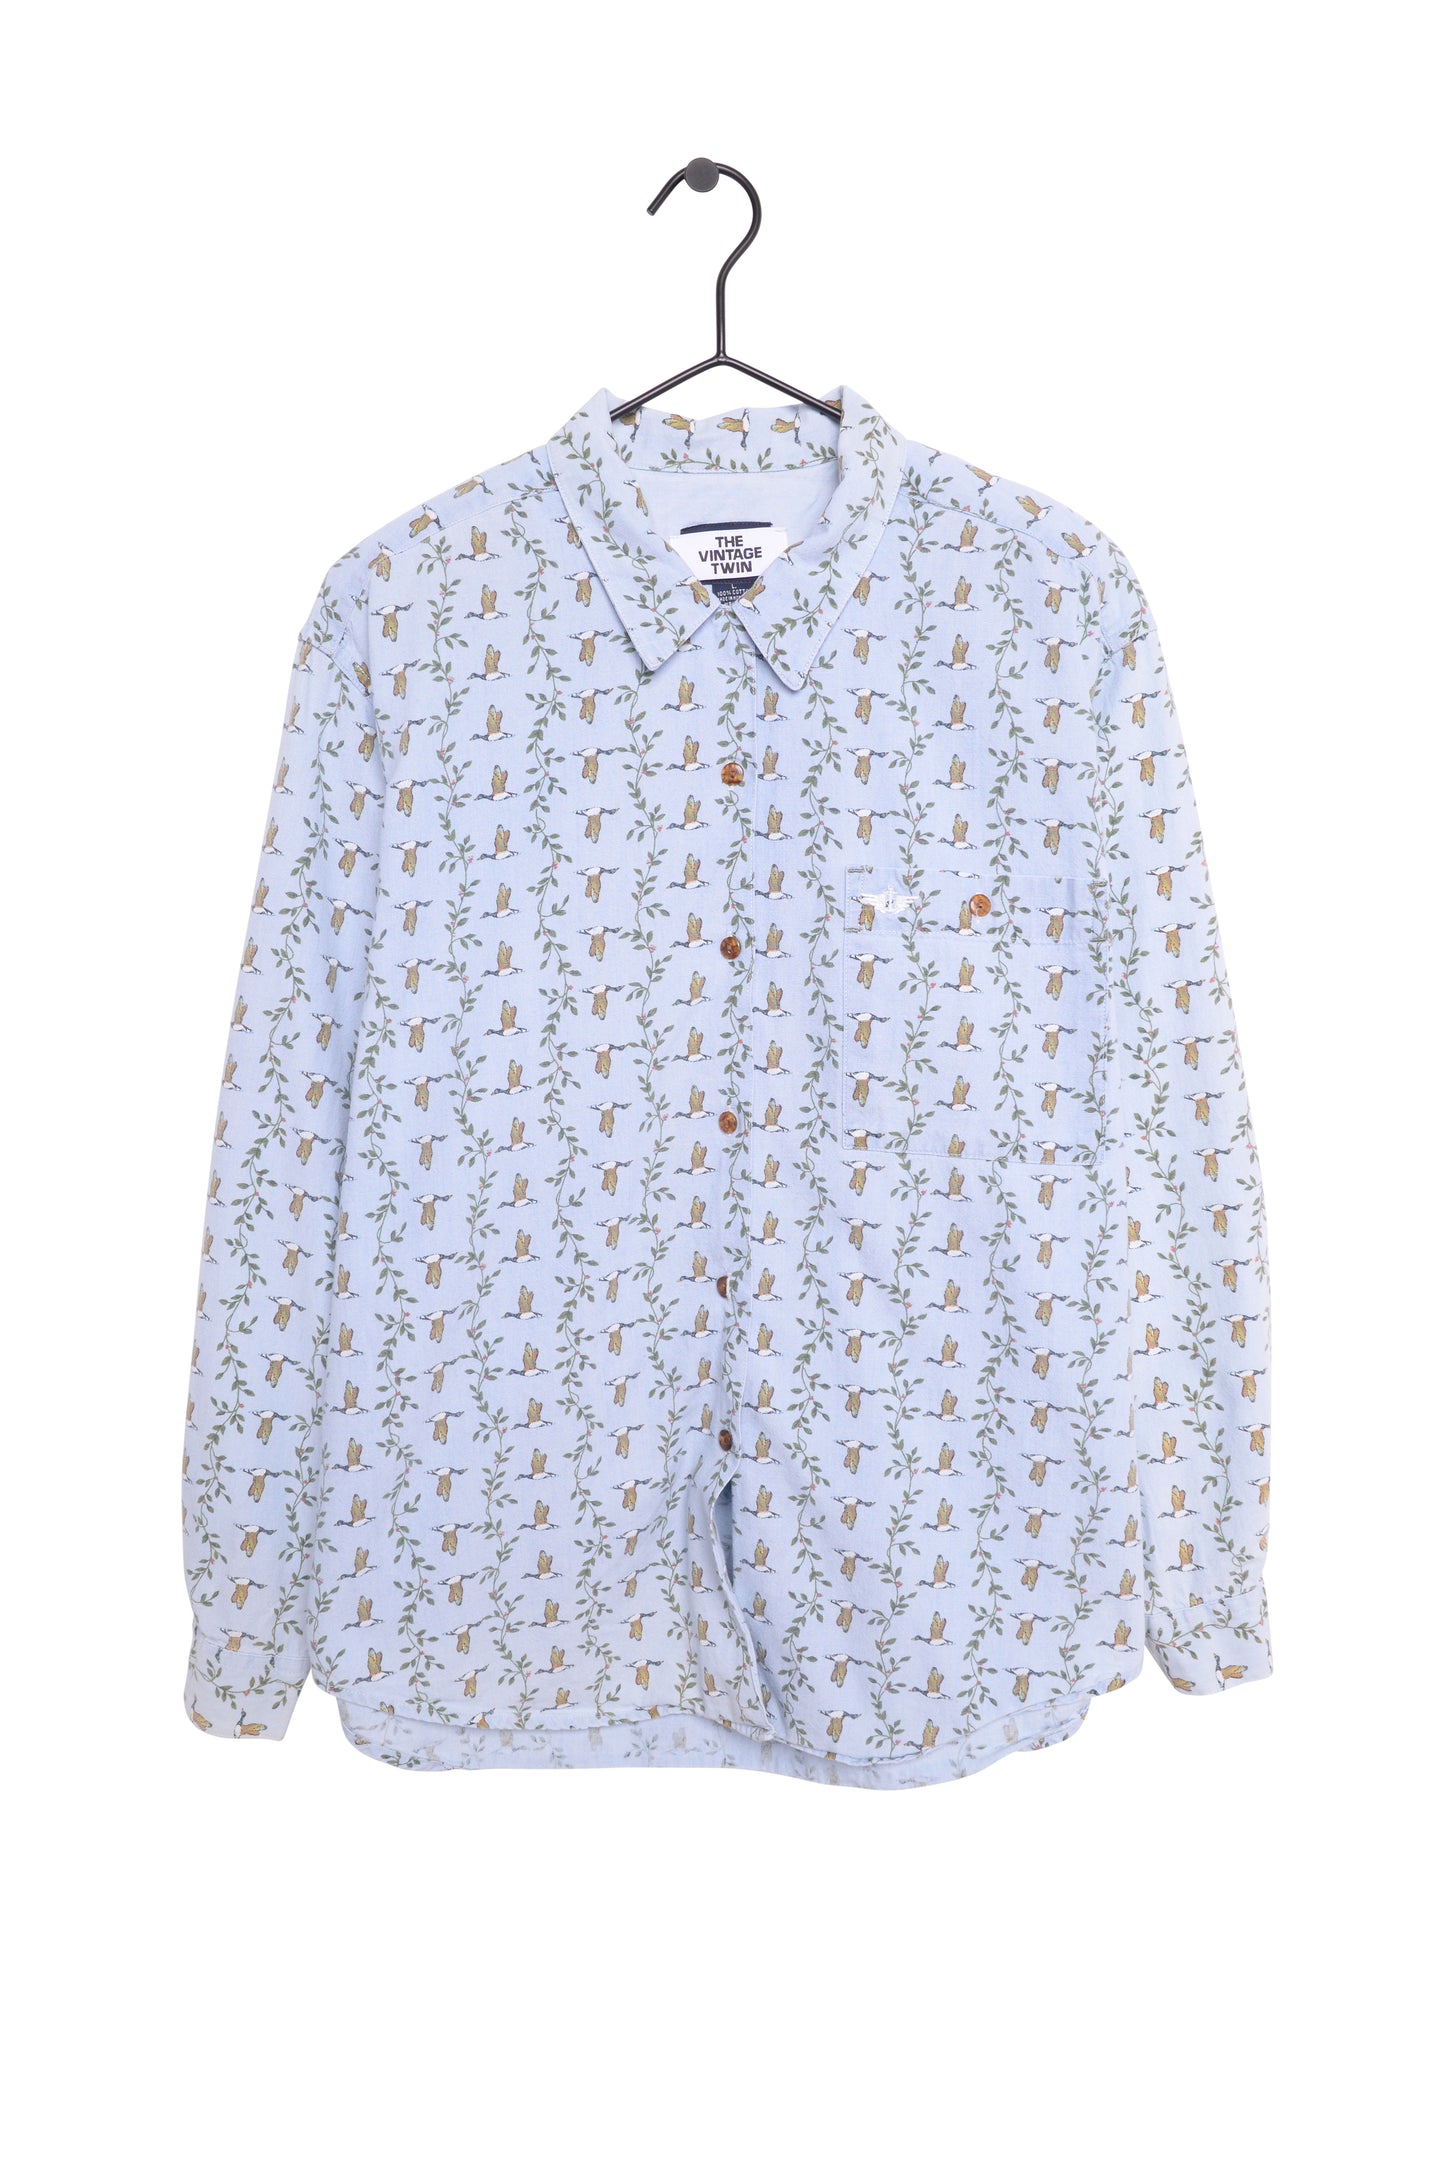 1990s Geese Print Button Down